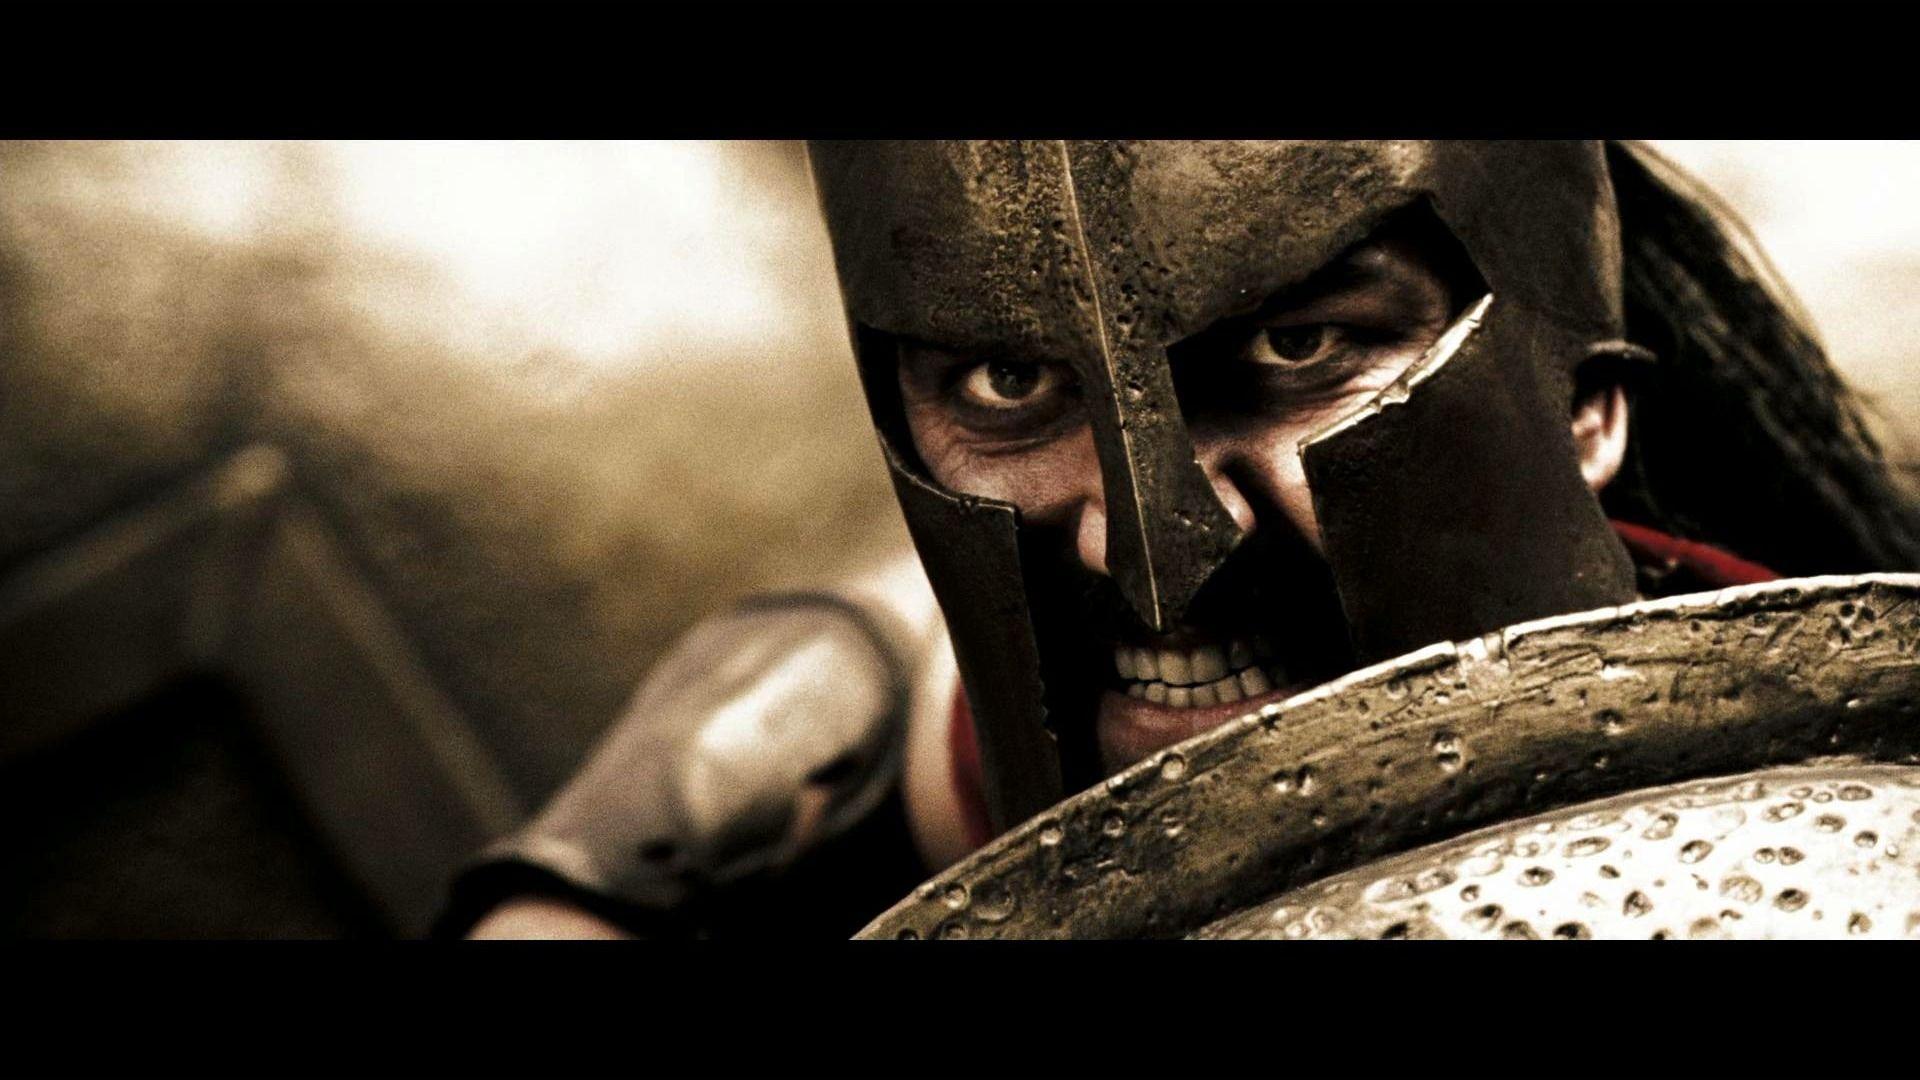 300. Trendy Of Victory With 300. Simple 300 With 300. King Leonidas